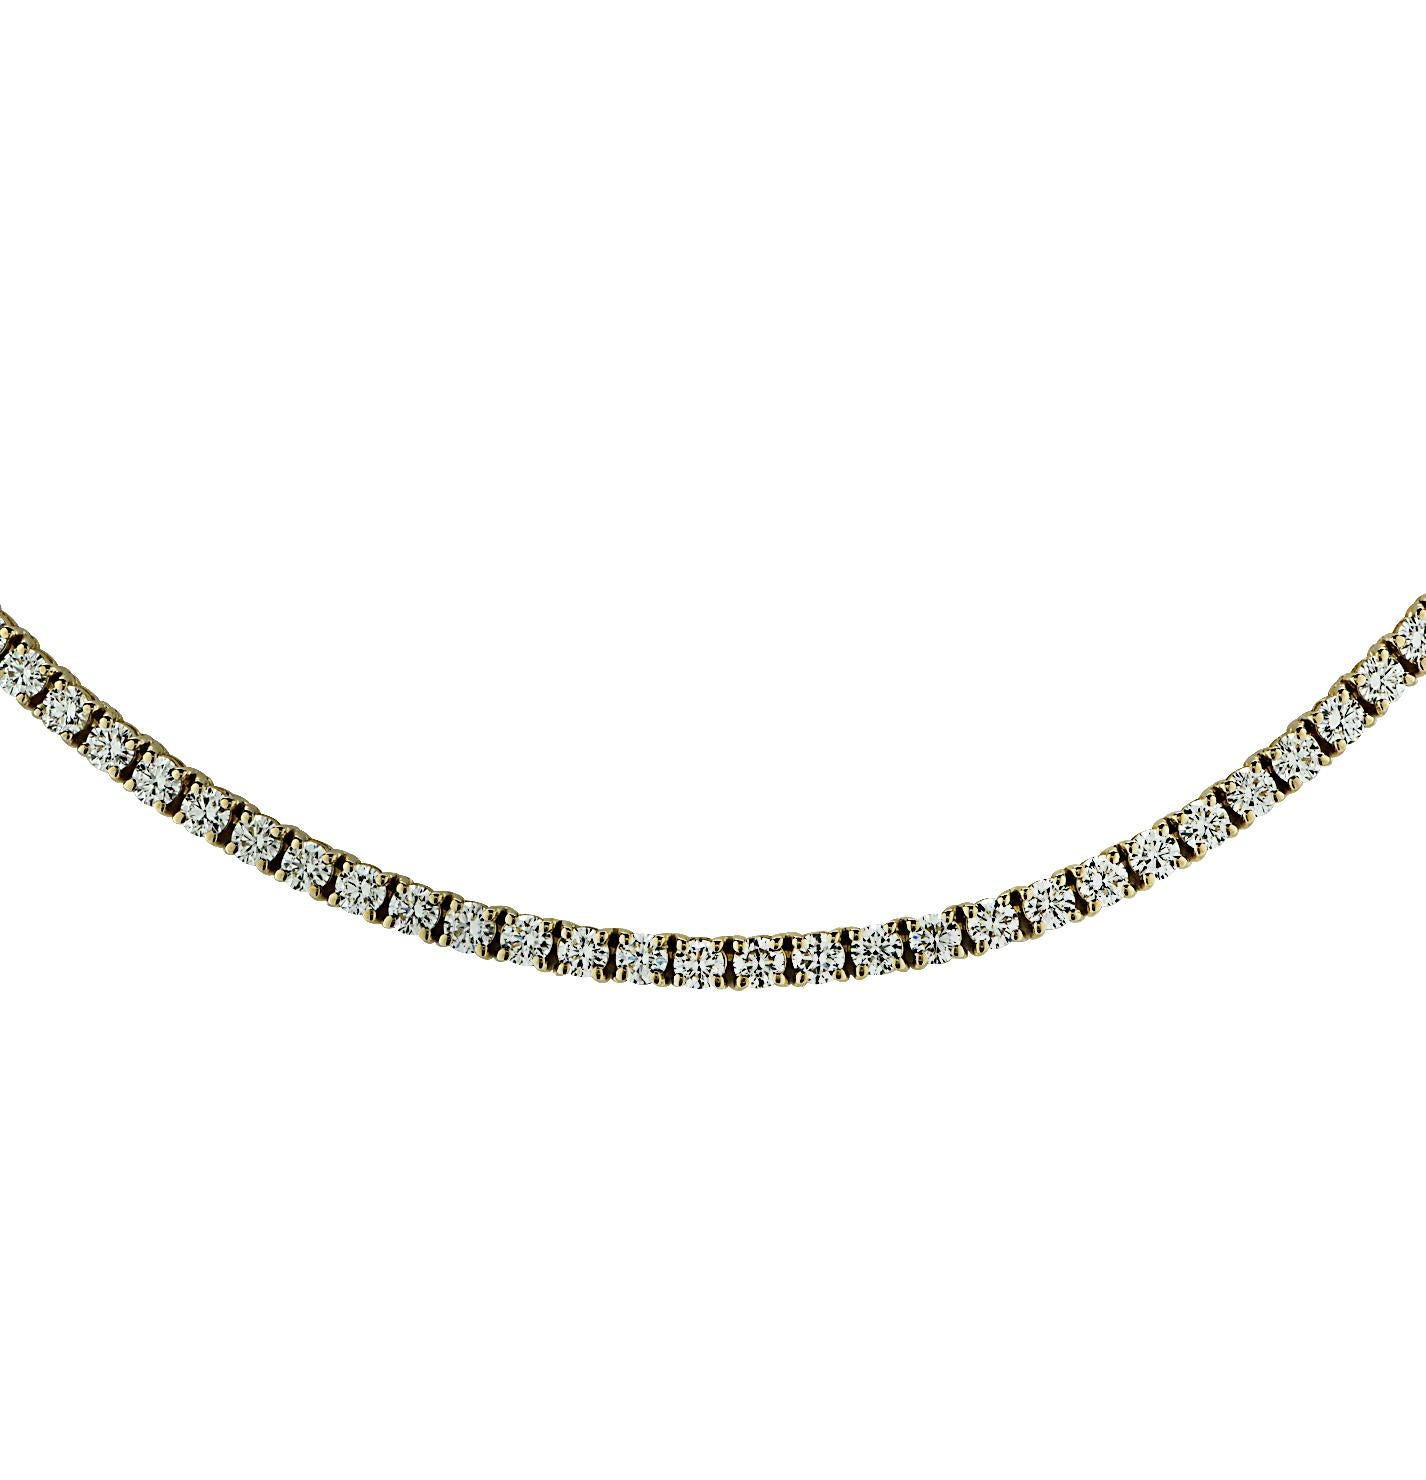 Exquisite Vivid Diamonds Straight Line diamond tennis necklace crafted in Yellow Gold, showcasing 130 round brilliant cut diamonds weighing 10.47 carats total, F color, VS clarity. Each diamond was carefully selected, perfectly matched and set in a